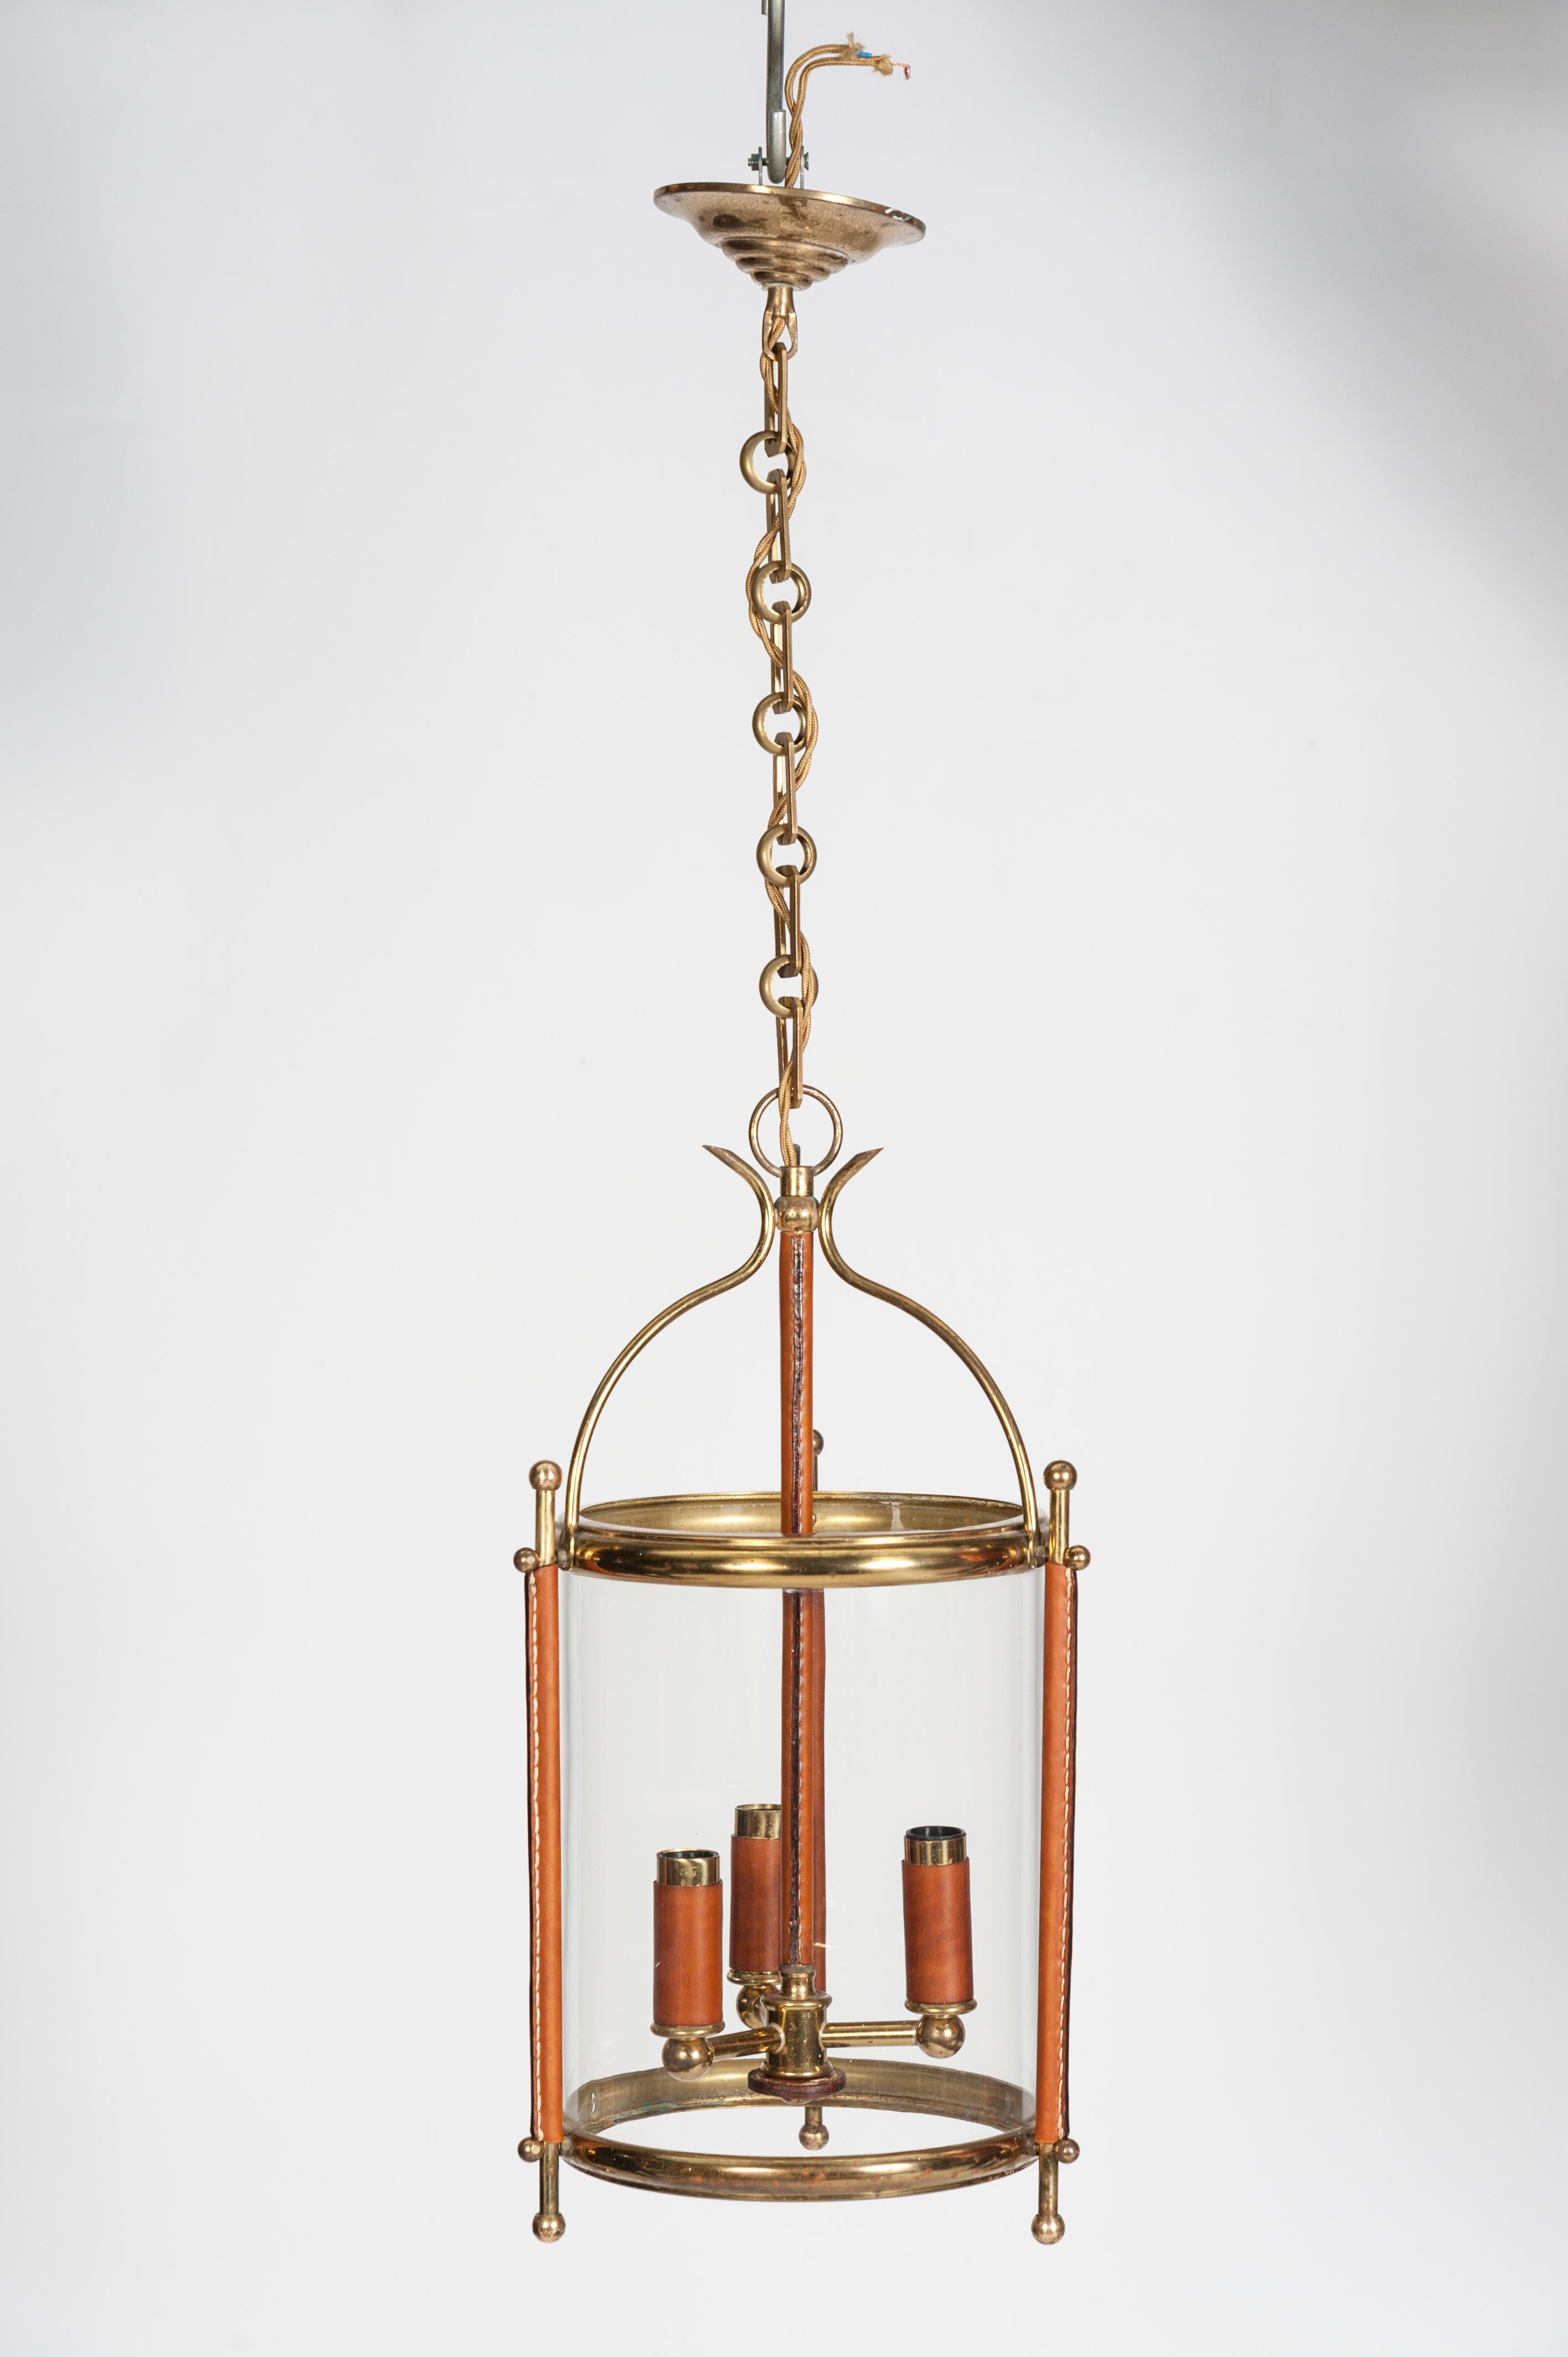 Stitched leather lantern
Measures: Diameter 25 cm high, 40 high with chain 80 cm.